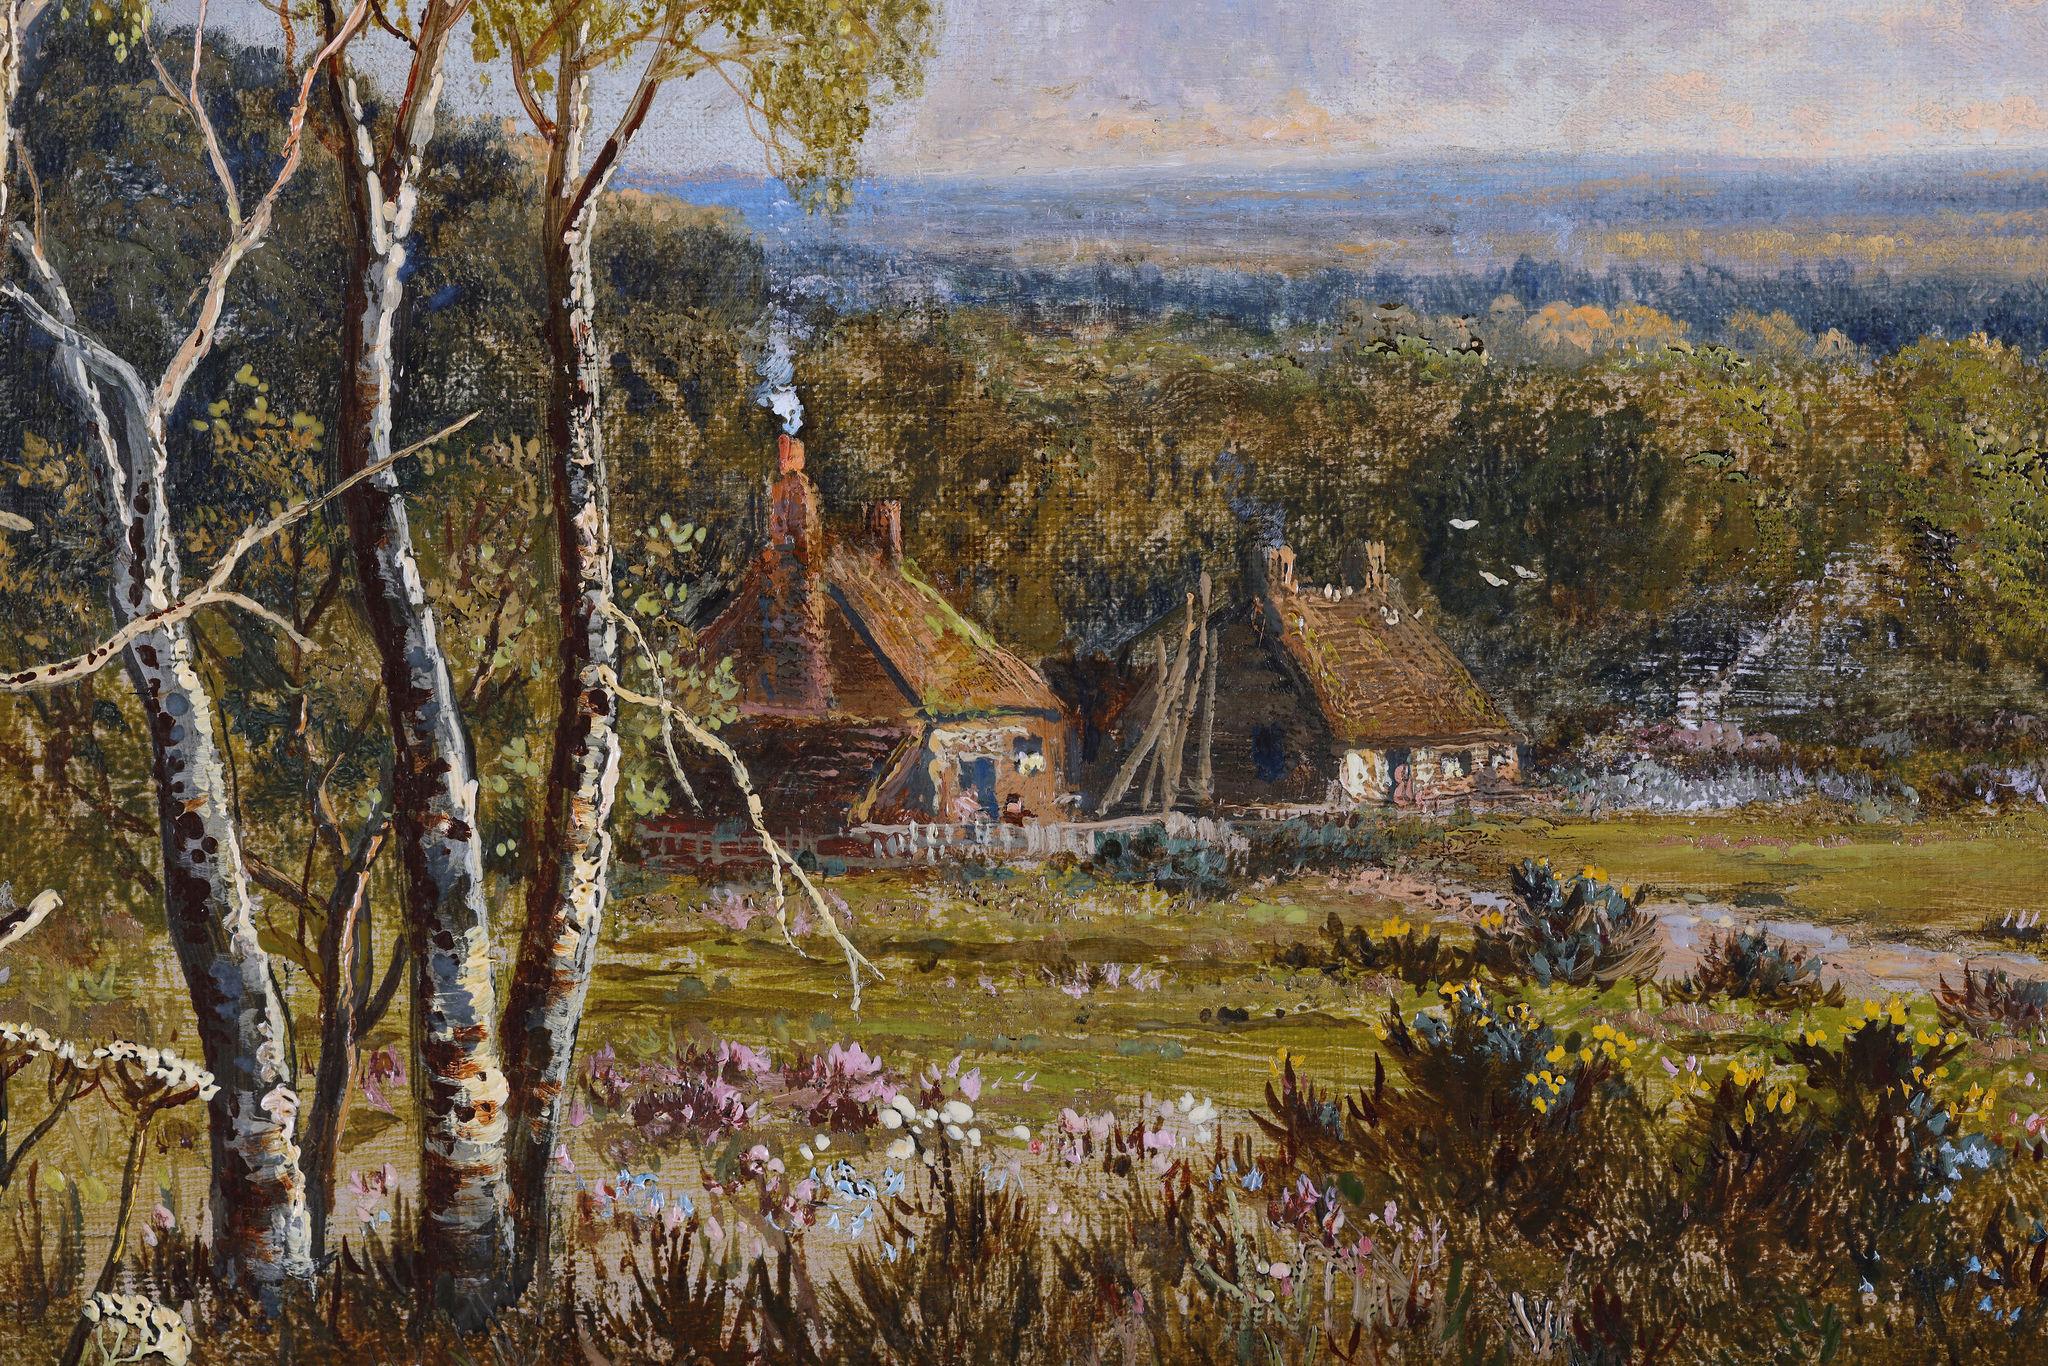 Edward Niemann
A lovely countryside painting by the highly regarded Edward Niemann. These pretty scenes are not regularly seen on the art market. Often they can have large boulders where he signs but this oil painting has a quaint country path with